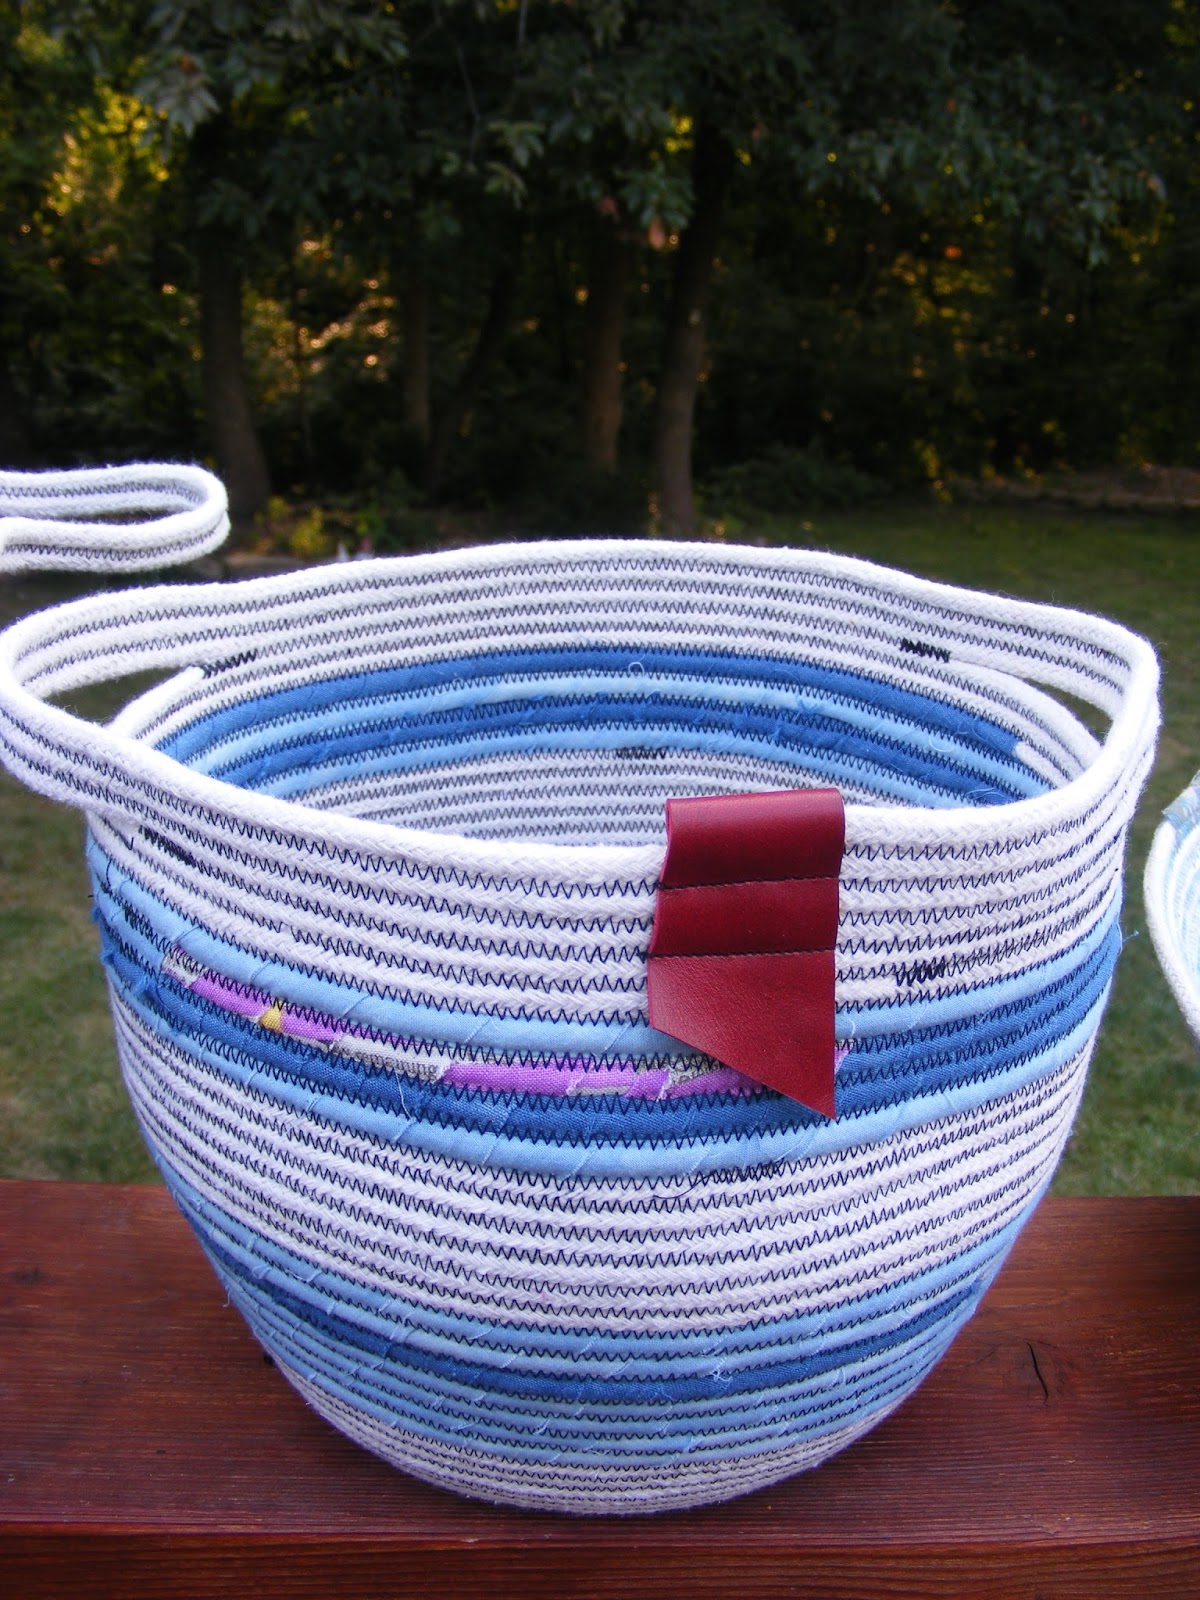 TIA CURTIS QUILTS: Rope Baskets are addictive - a little tutorial for you